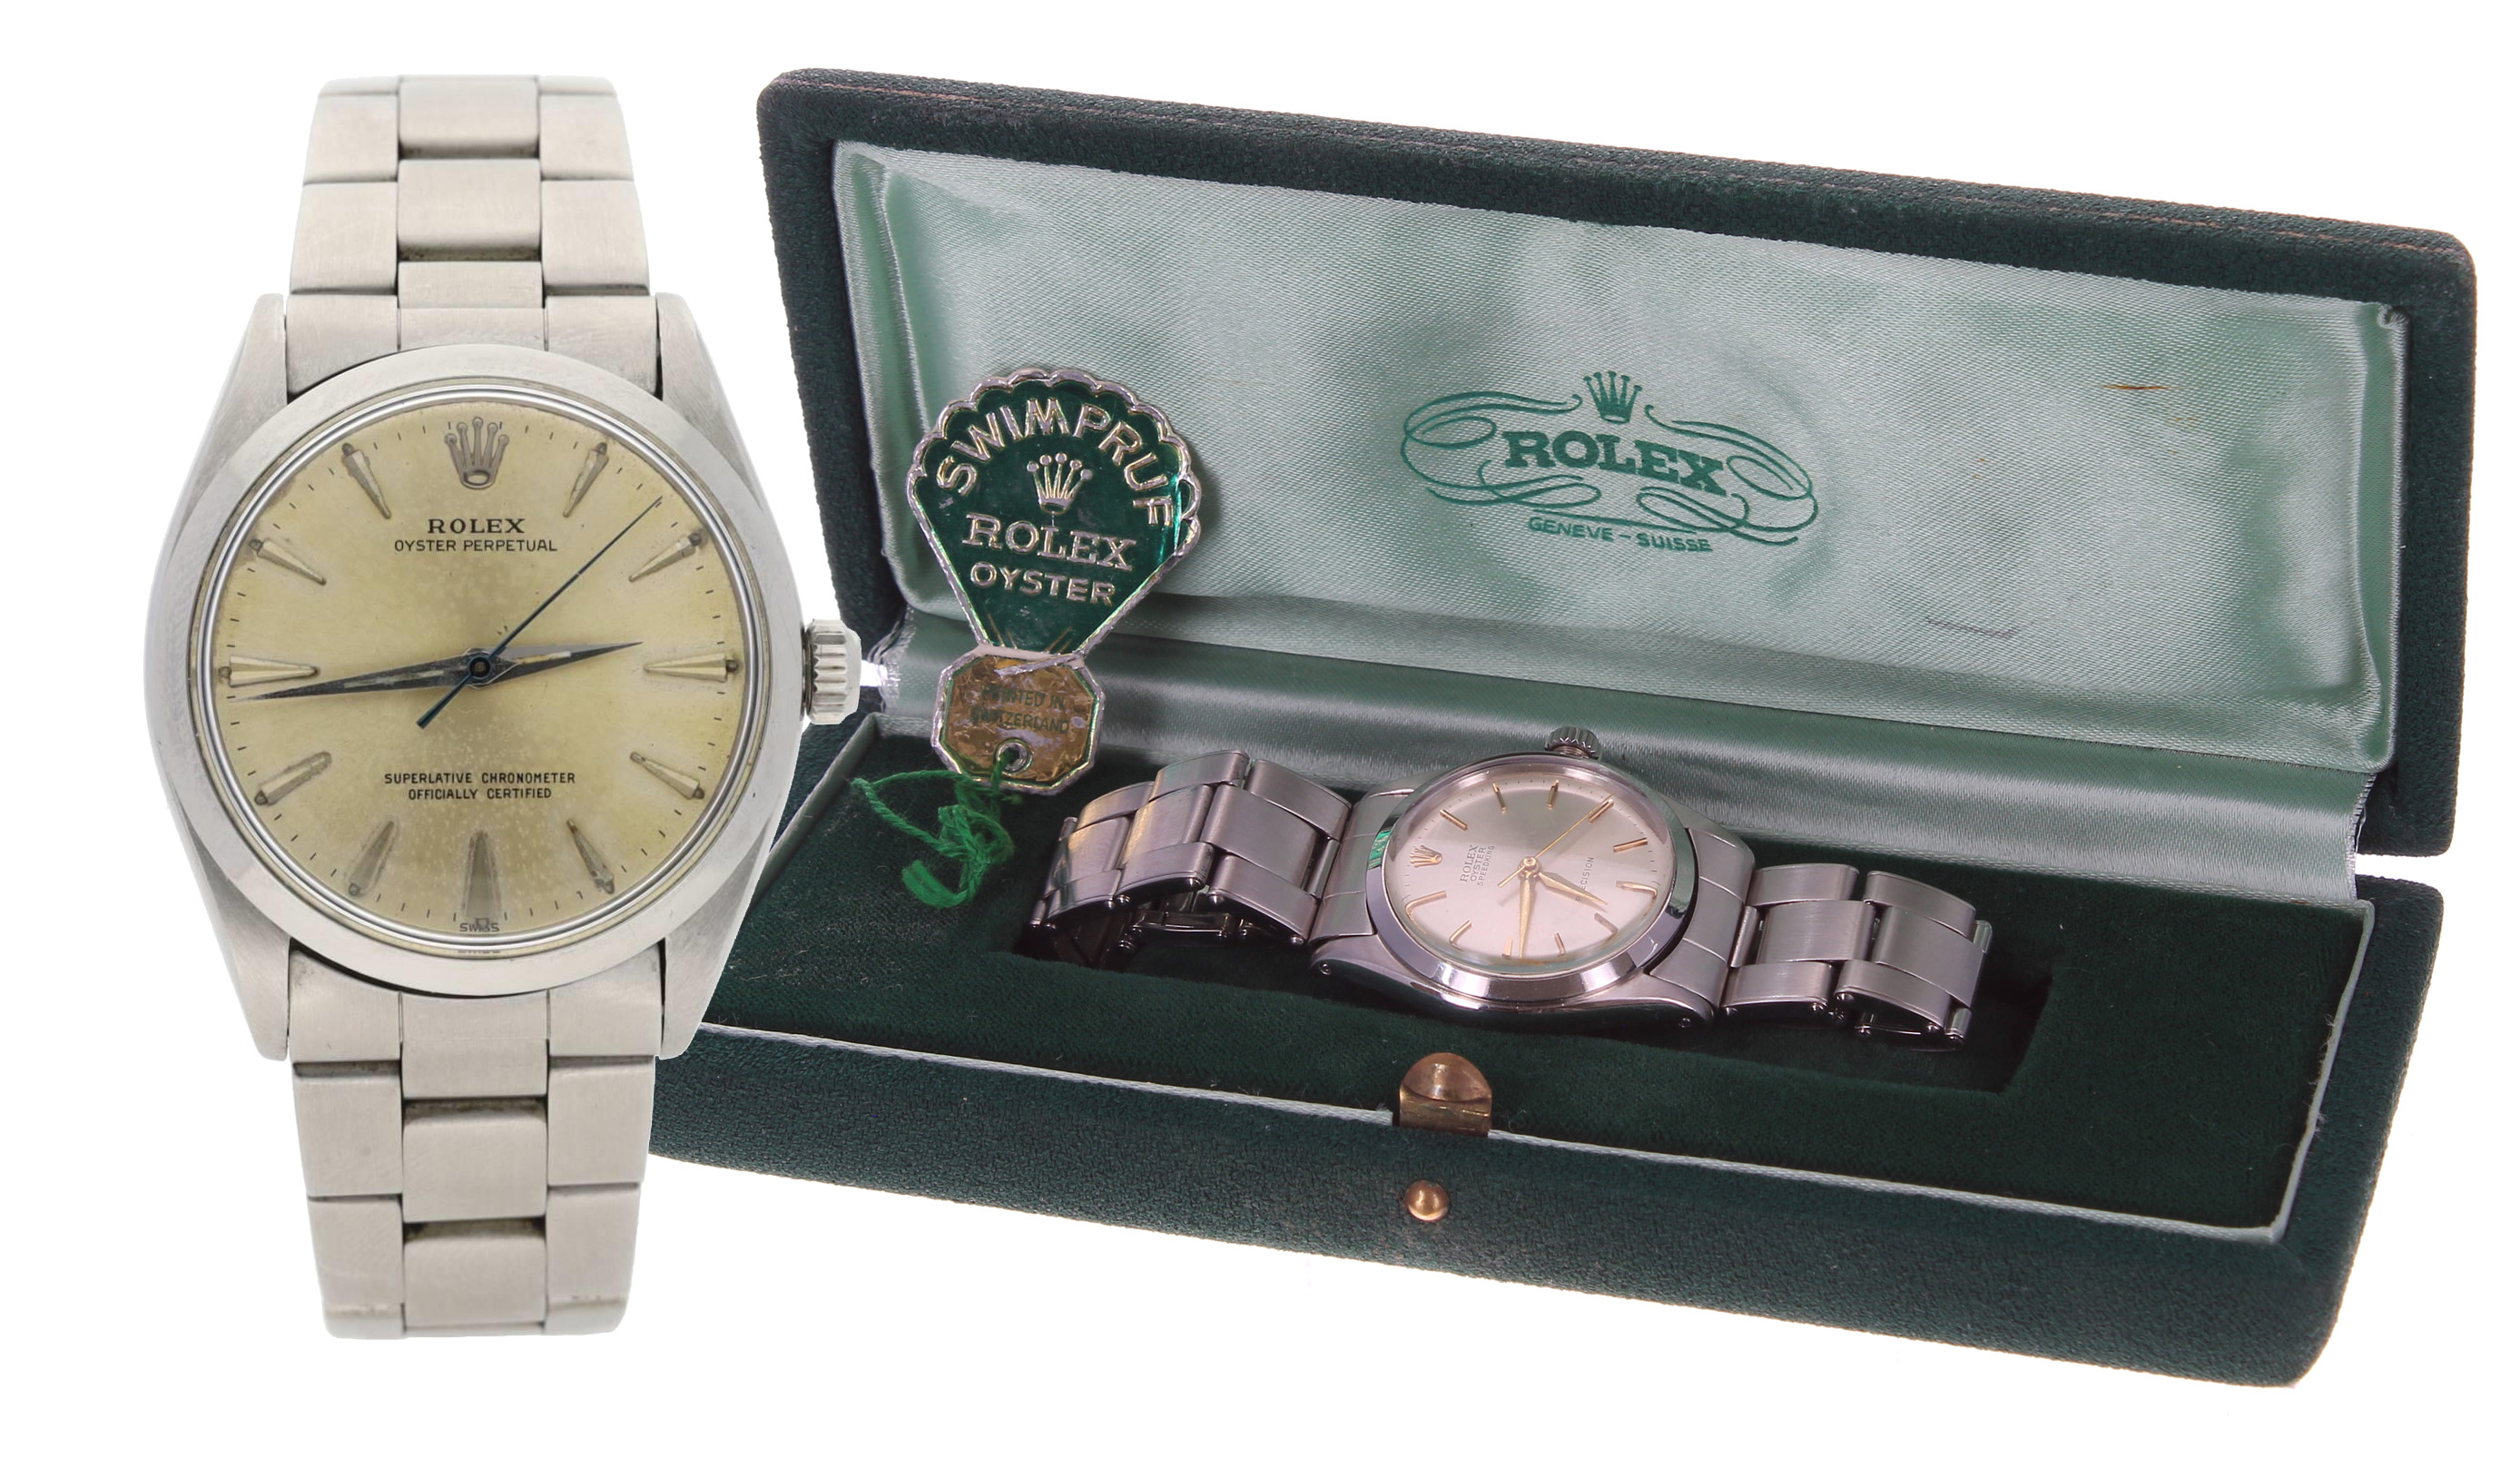 Rolex Oyster Speedking Precision stainless steel mid-size wristwatch, reference no. 6430, serial no.